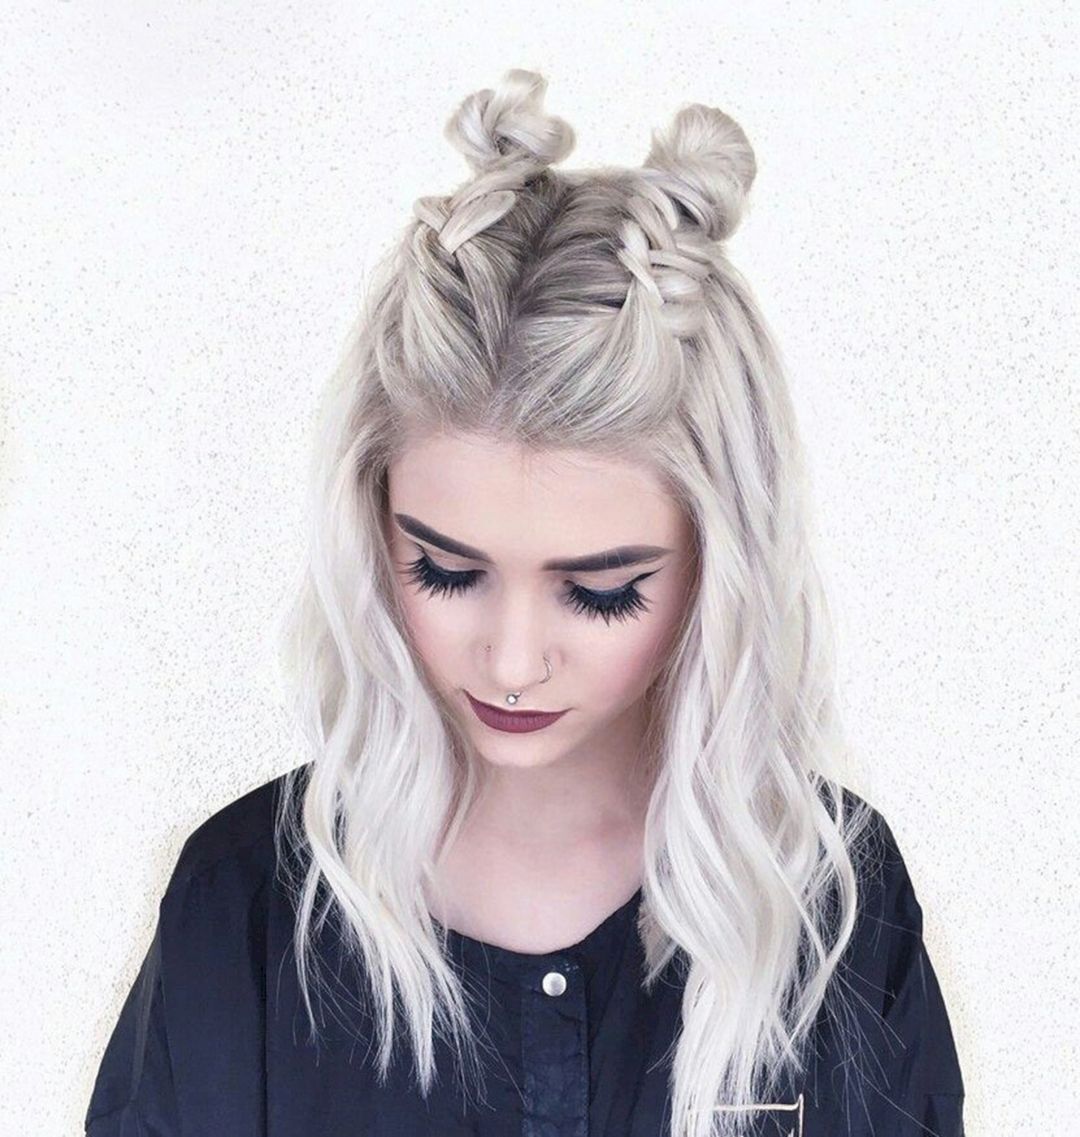 Bunni buns hairstyle from weheartit